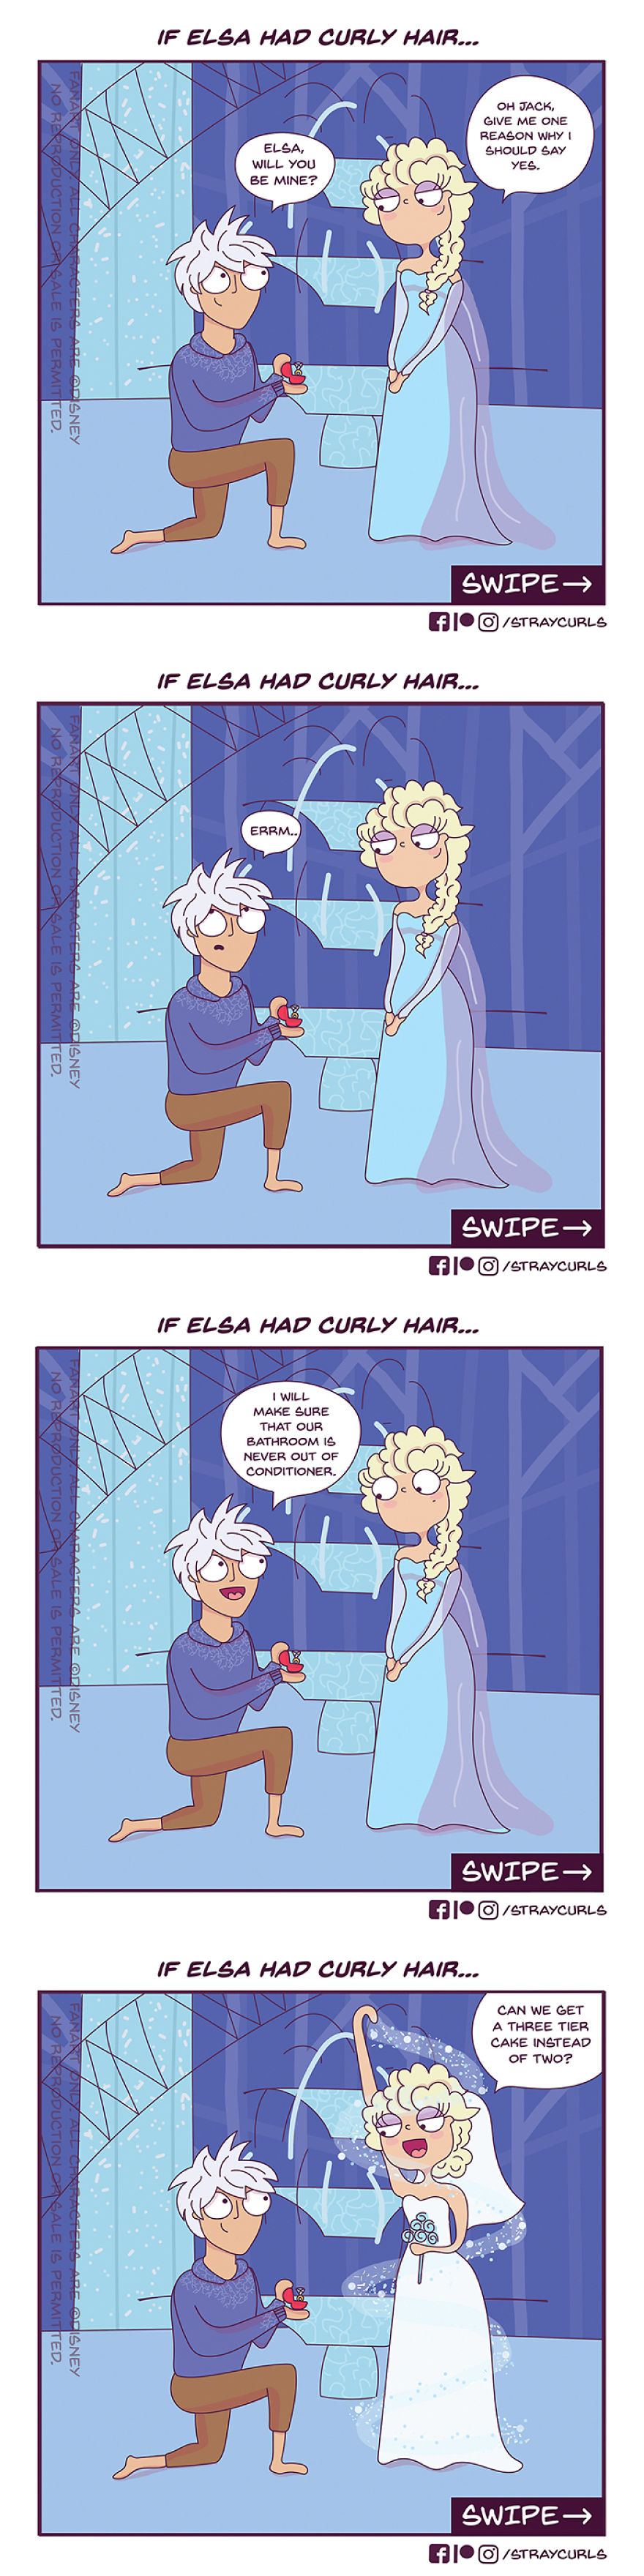 If Elsa from 